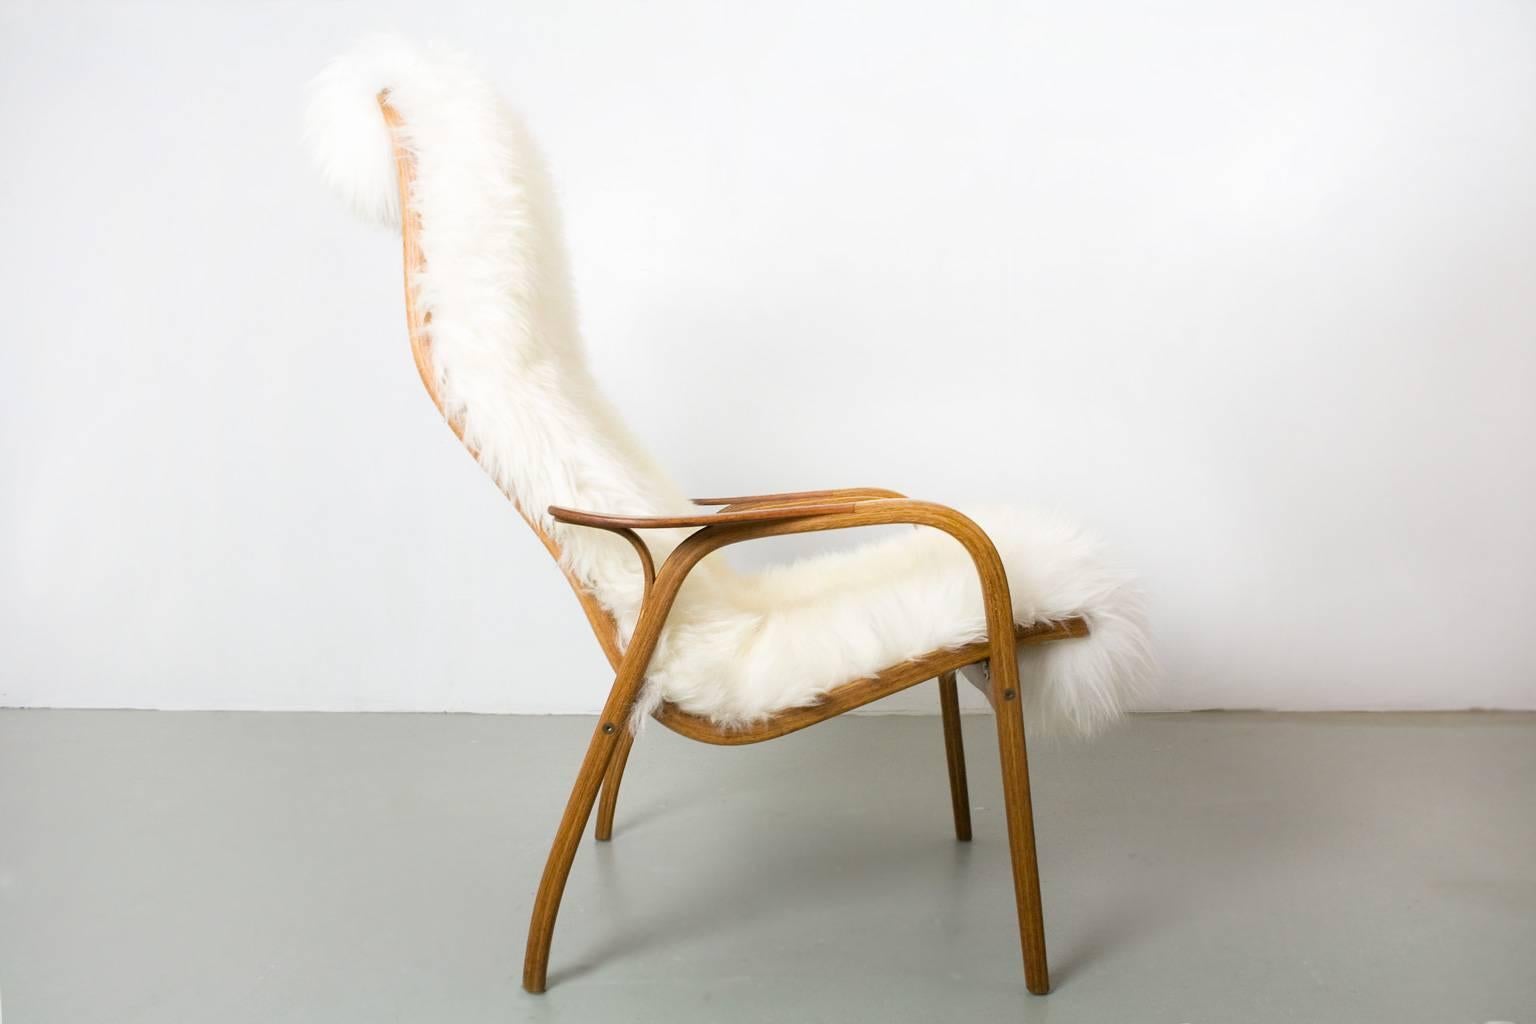 Scandinavian Modern at it's best. New upholstered with a very high quality long haired sheep skin. This lounge chair model “Lamino” was designed in 1951 by Yngve Ekström and manufactured by his company, Swedese, based outside of Nässjö. This lounge